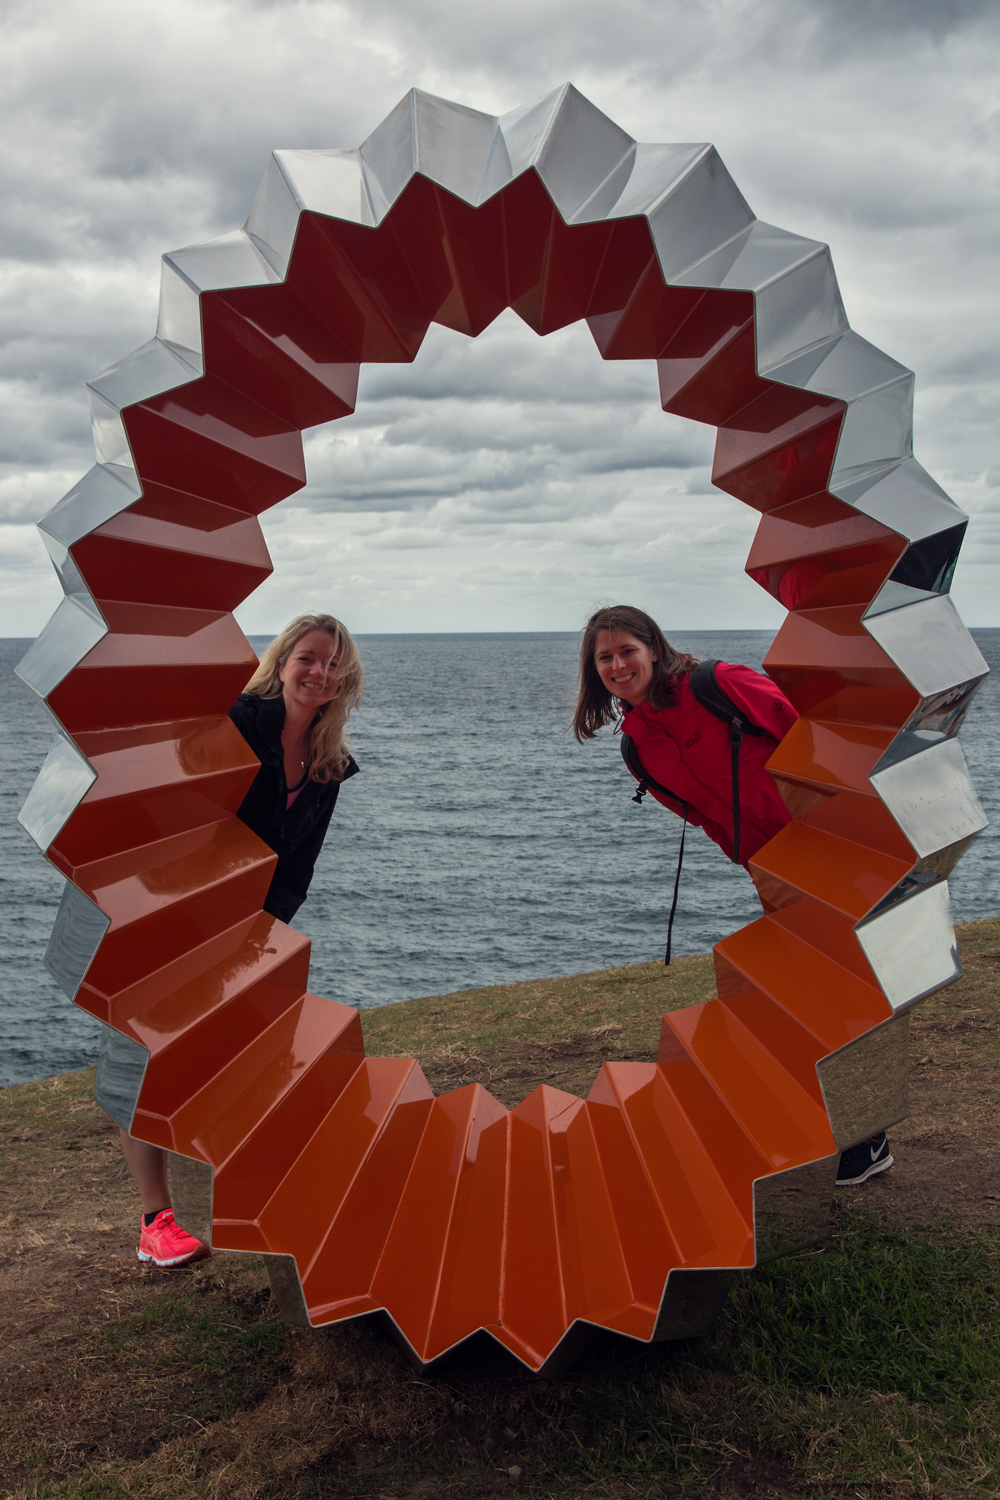 Sculpture By The Sea